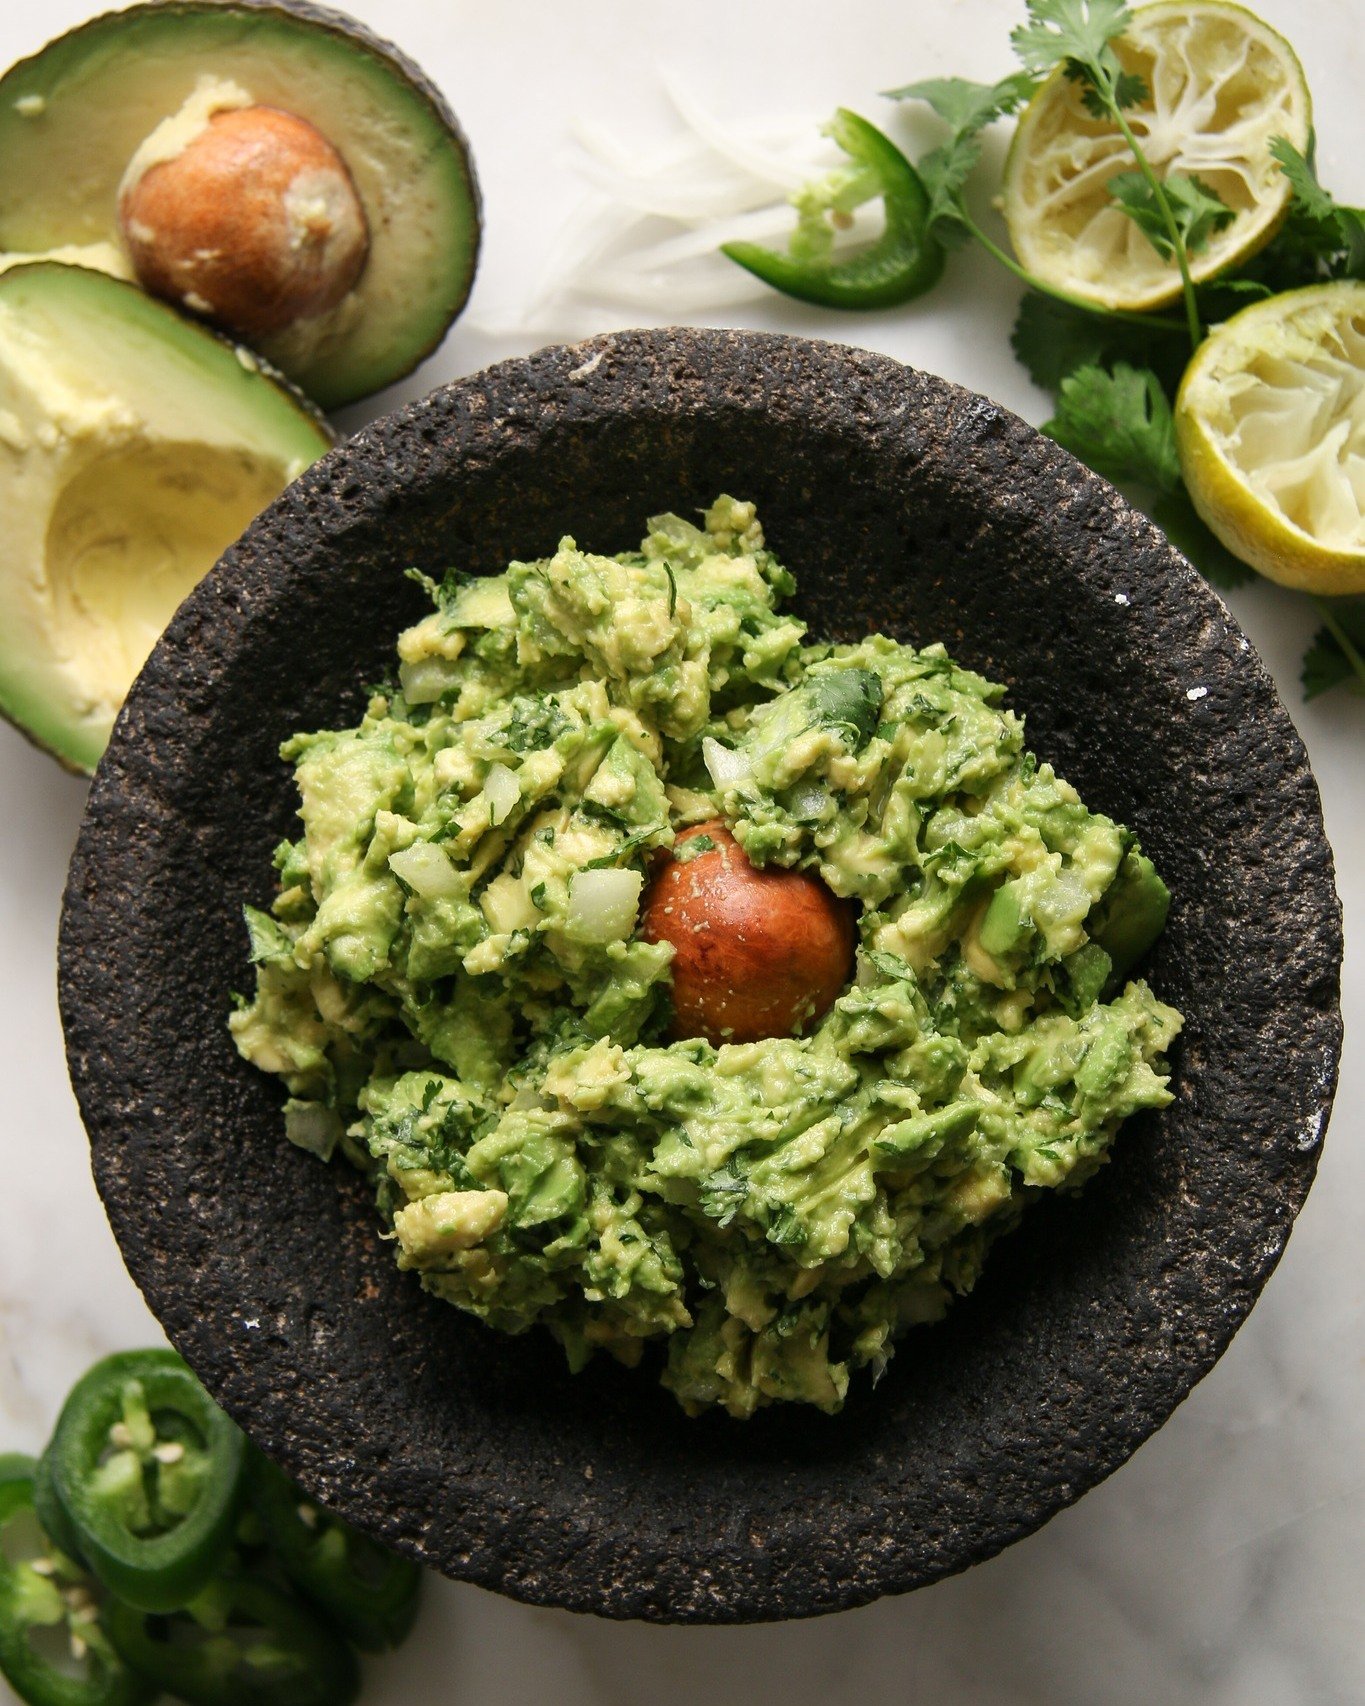 Do you need an easy after-school-snack or maybe you're planning a Cinco de Mayo celebration? You have to try this easy guac recipe. I've shared it on my website and it's also in my cookbook, My South Texas Kitchen.  Let me know if you make it! 🥑🥑🥑